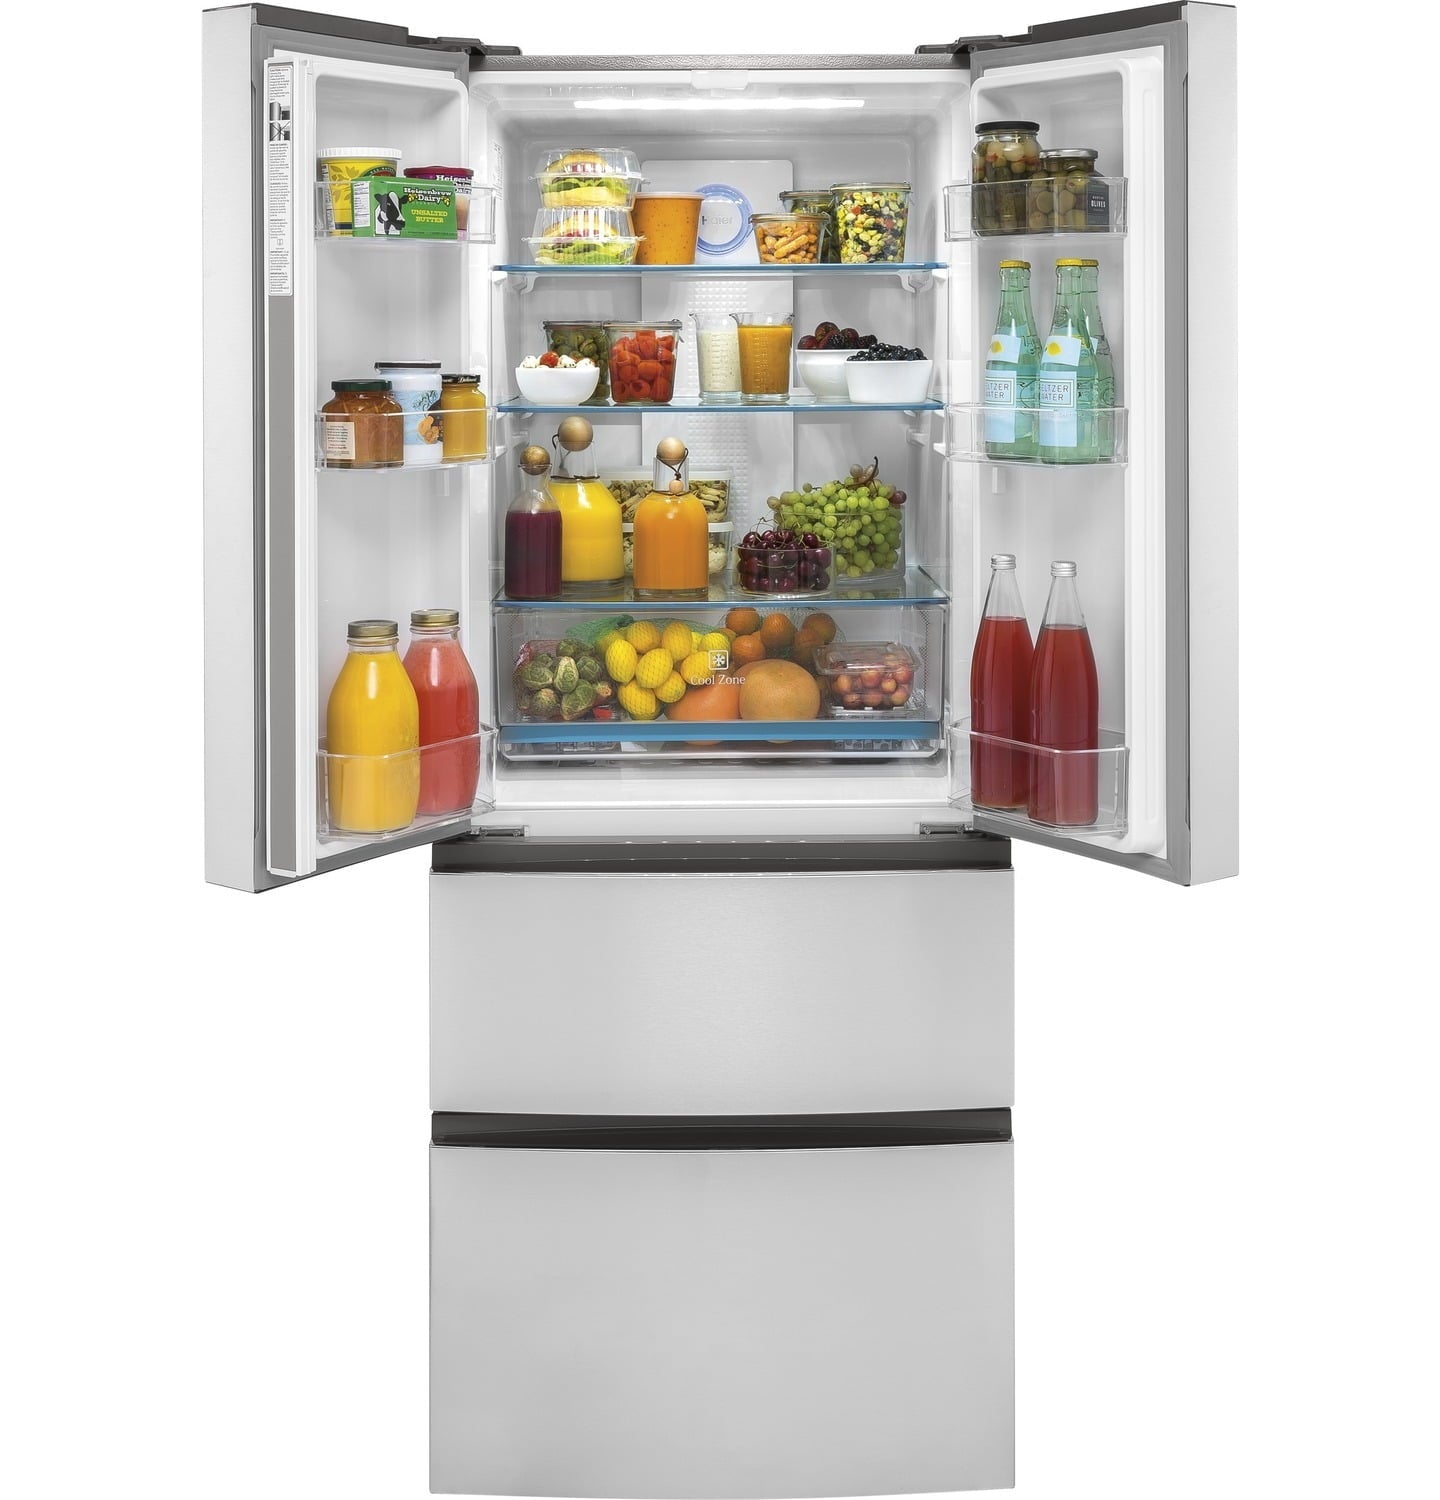 Haier HRF15N3AGS 15.3 Cu. Ft. French Door Refrigerator